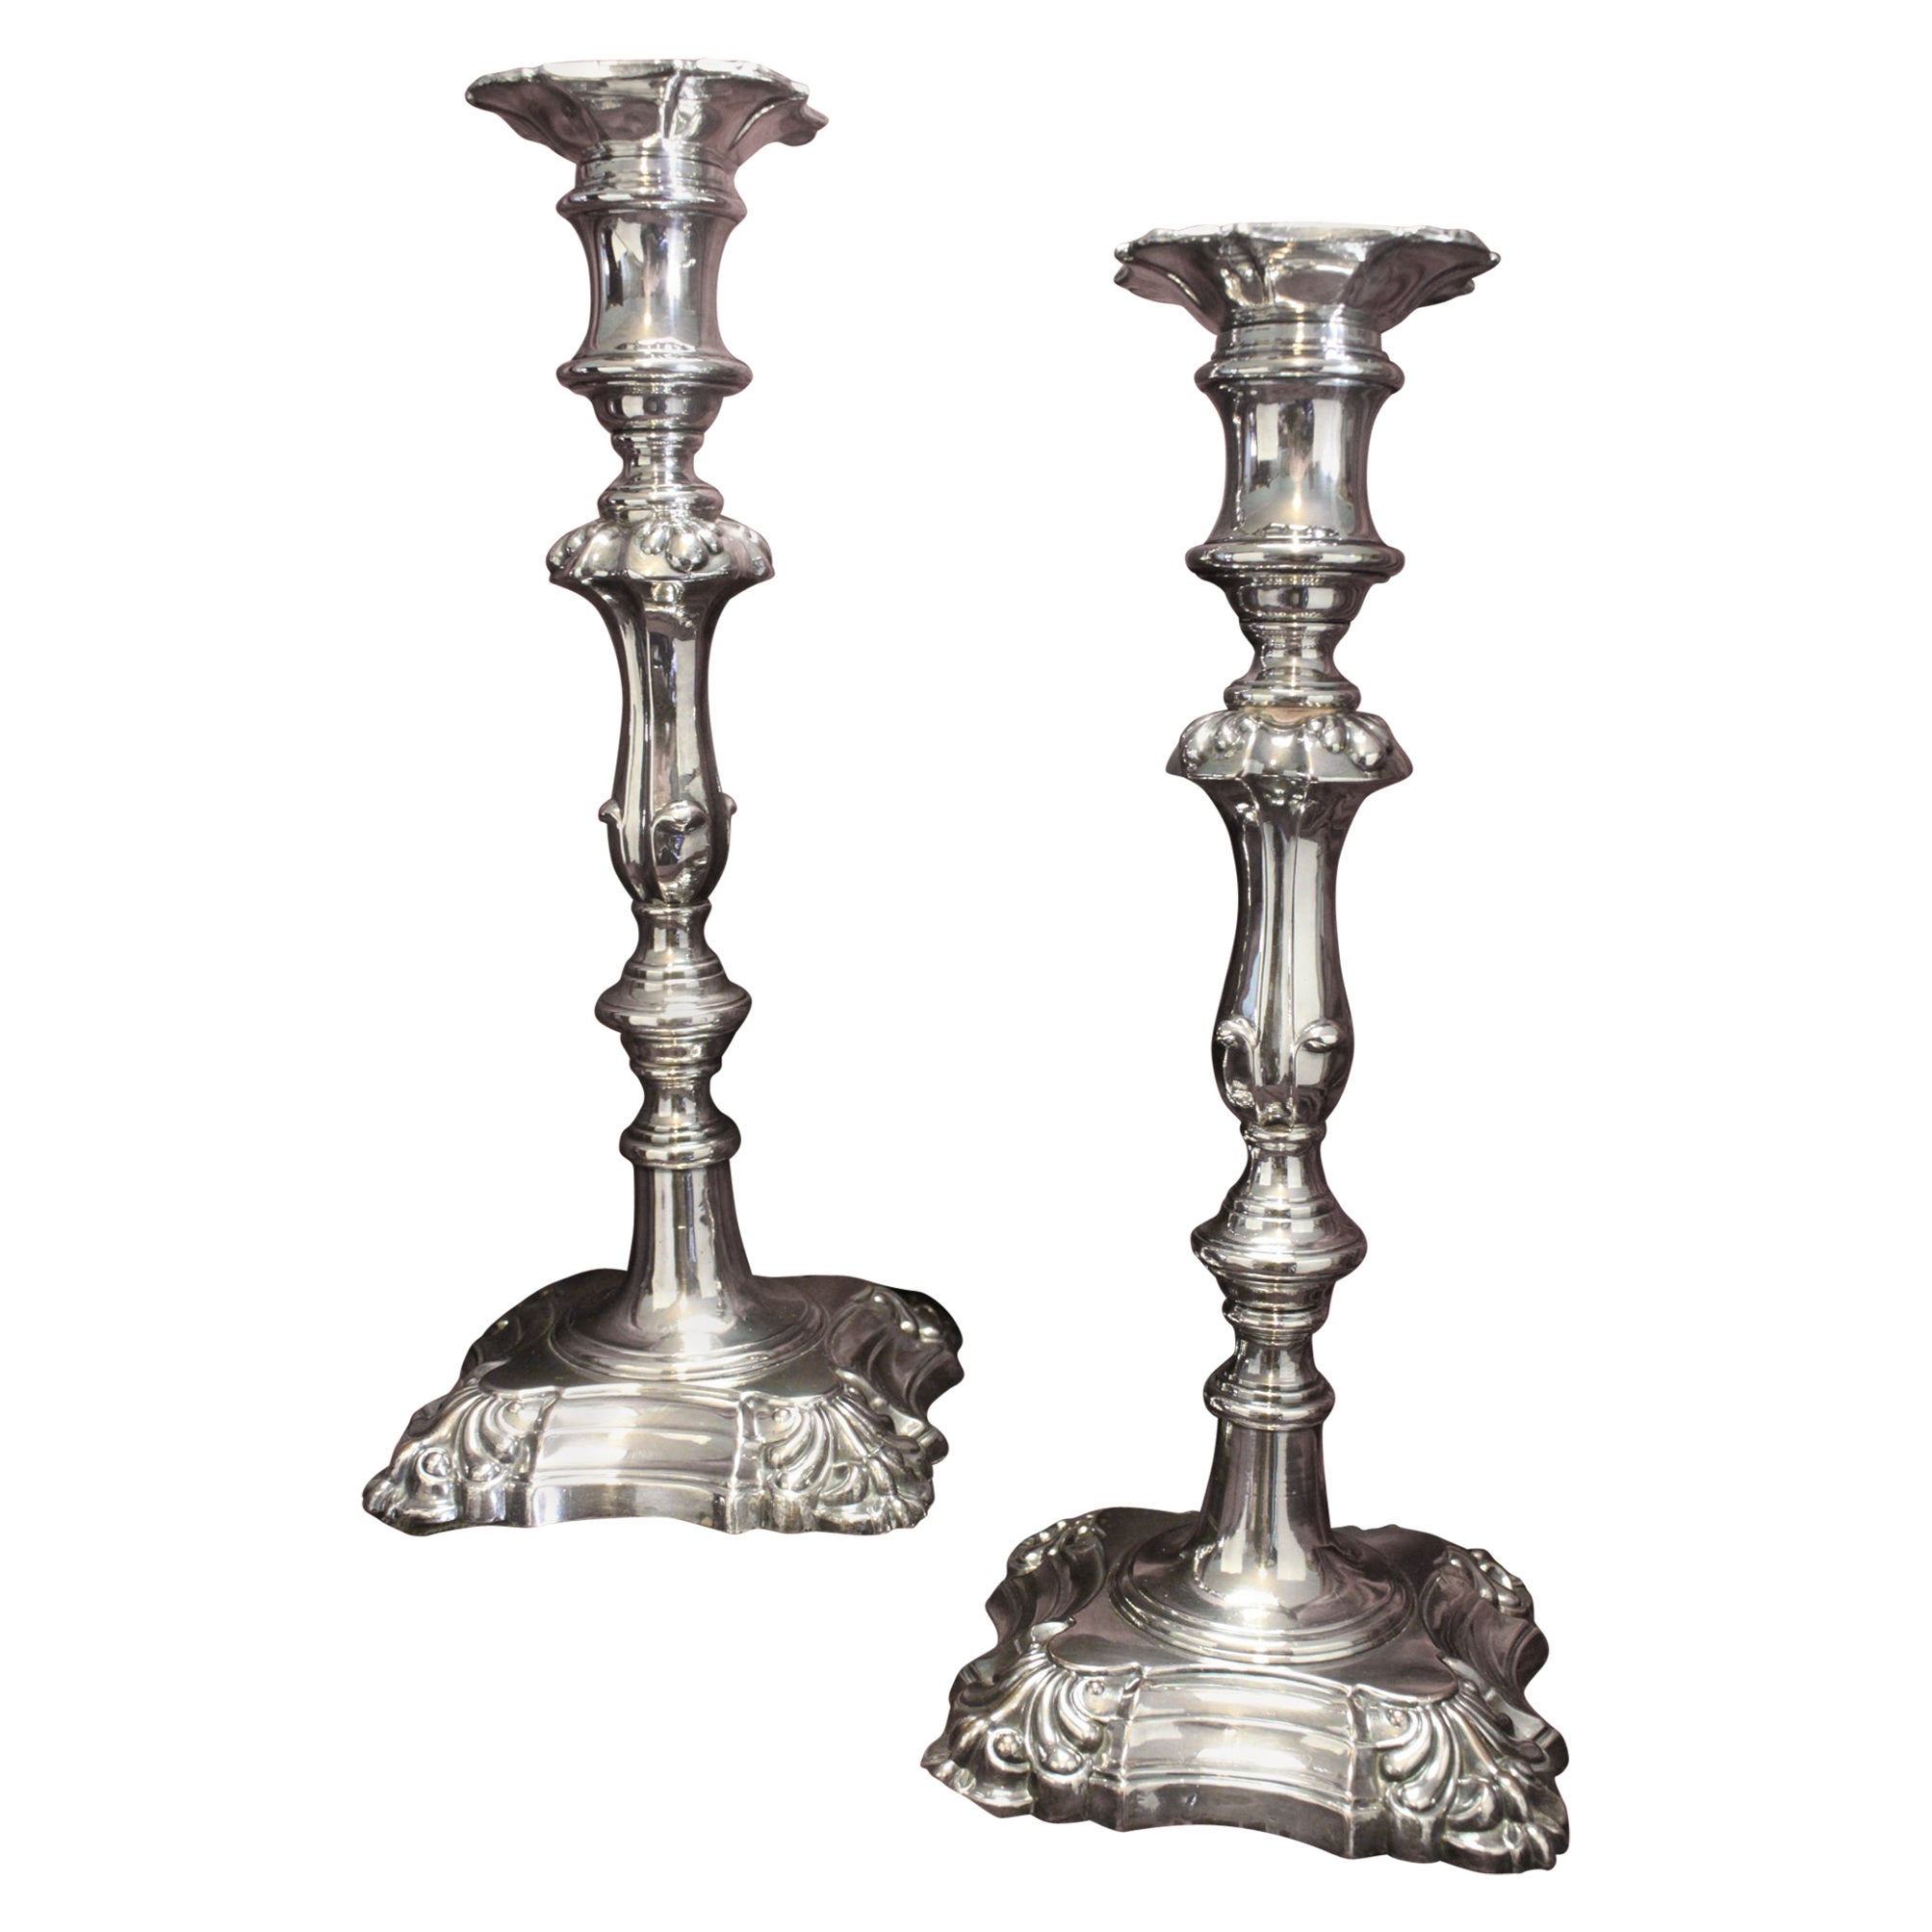 Pair of Old Sheffield Plate Candlesticks For Sale